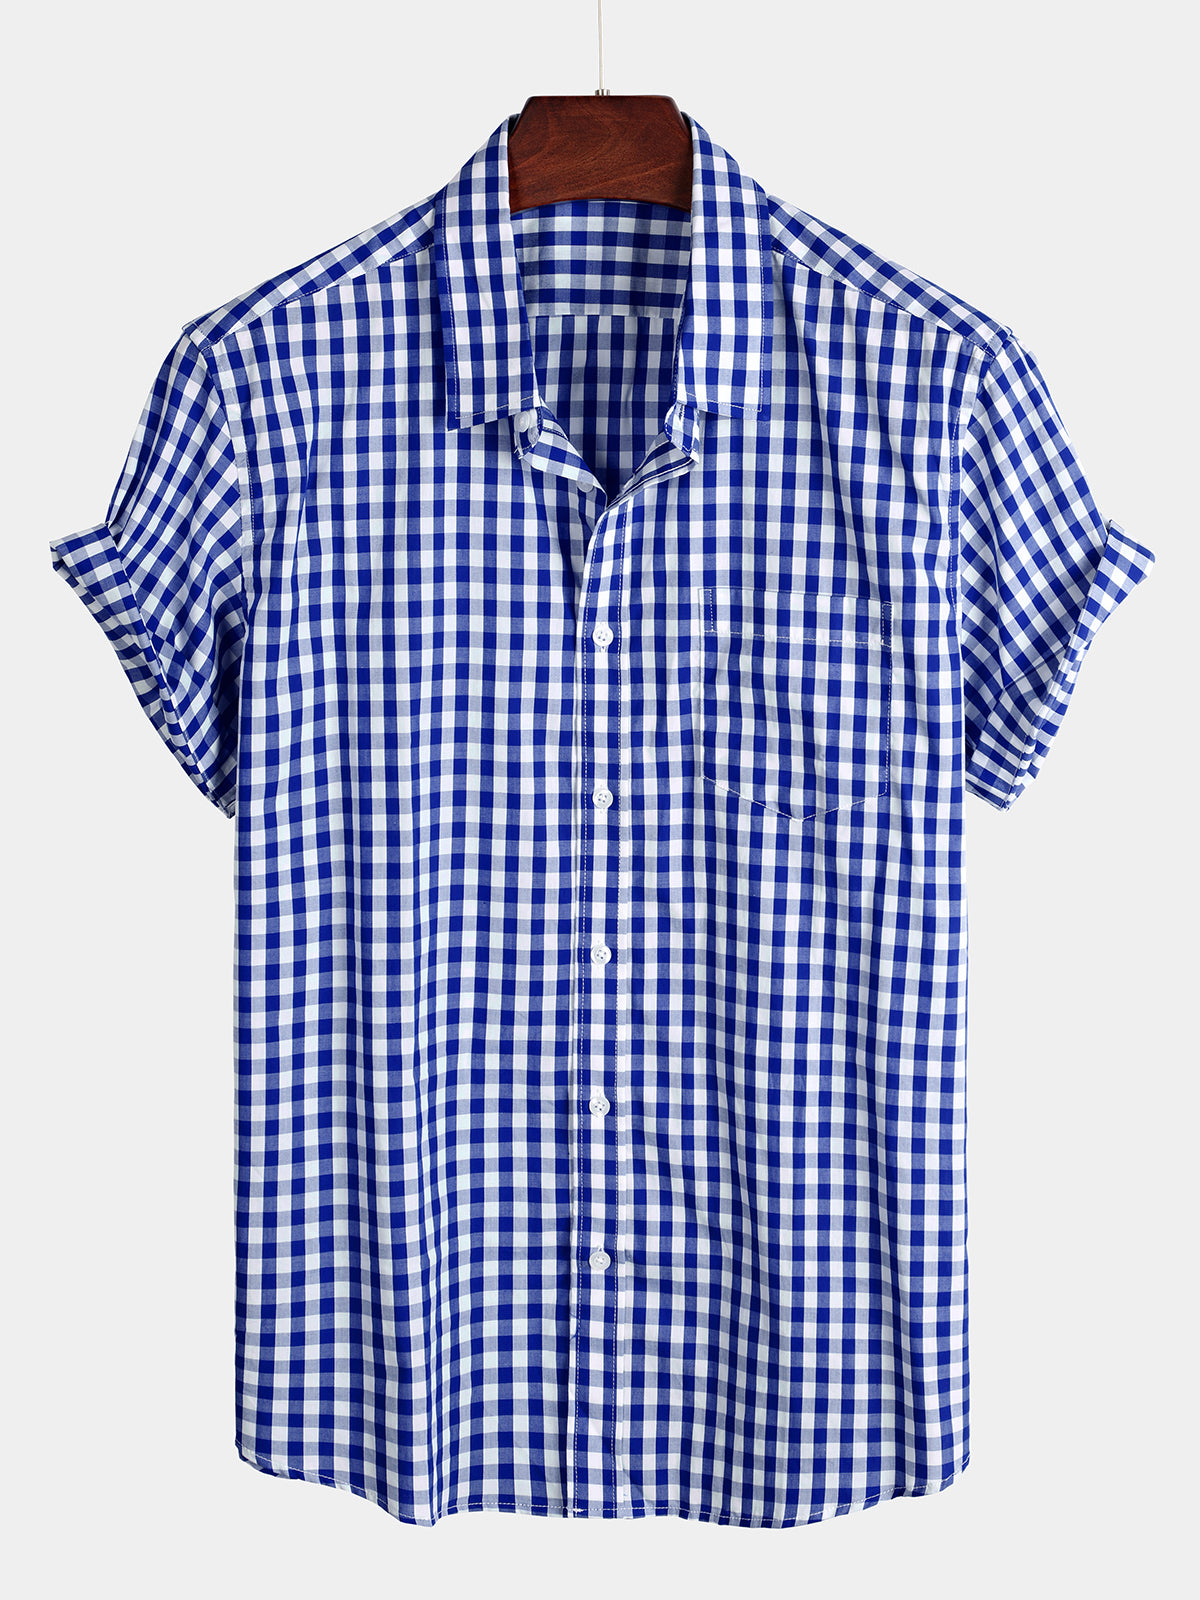 Men's Plaid Cotton Casual Solid Color Pocket Summer Holiday Button Up Short Sleeve Shirt